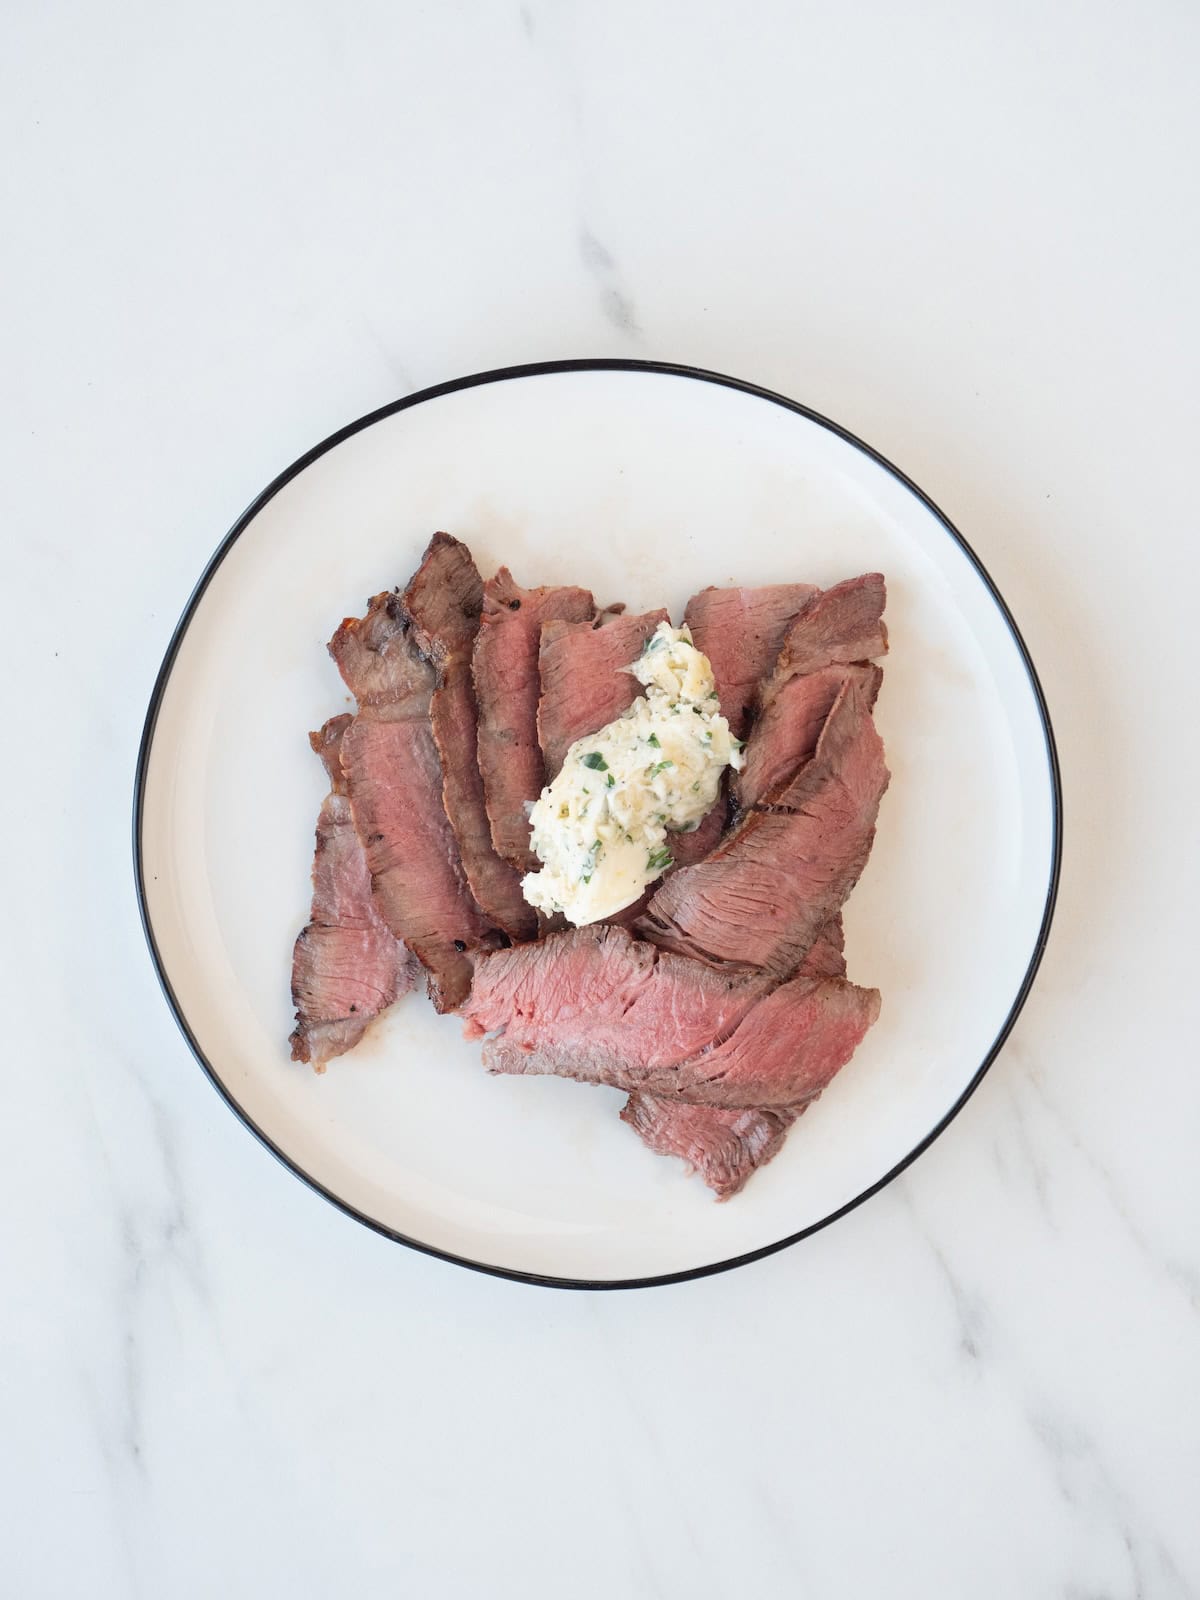 A plate with sliced grilled rib eye steak, and a dollop of compound butter on top.